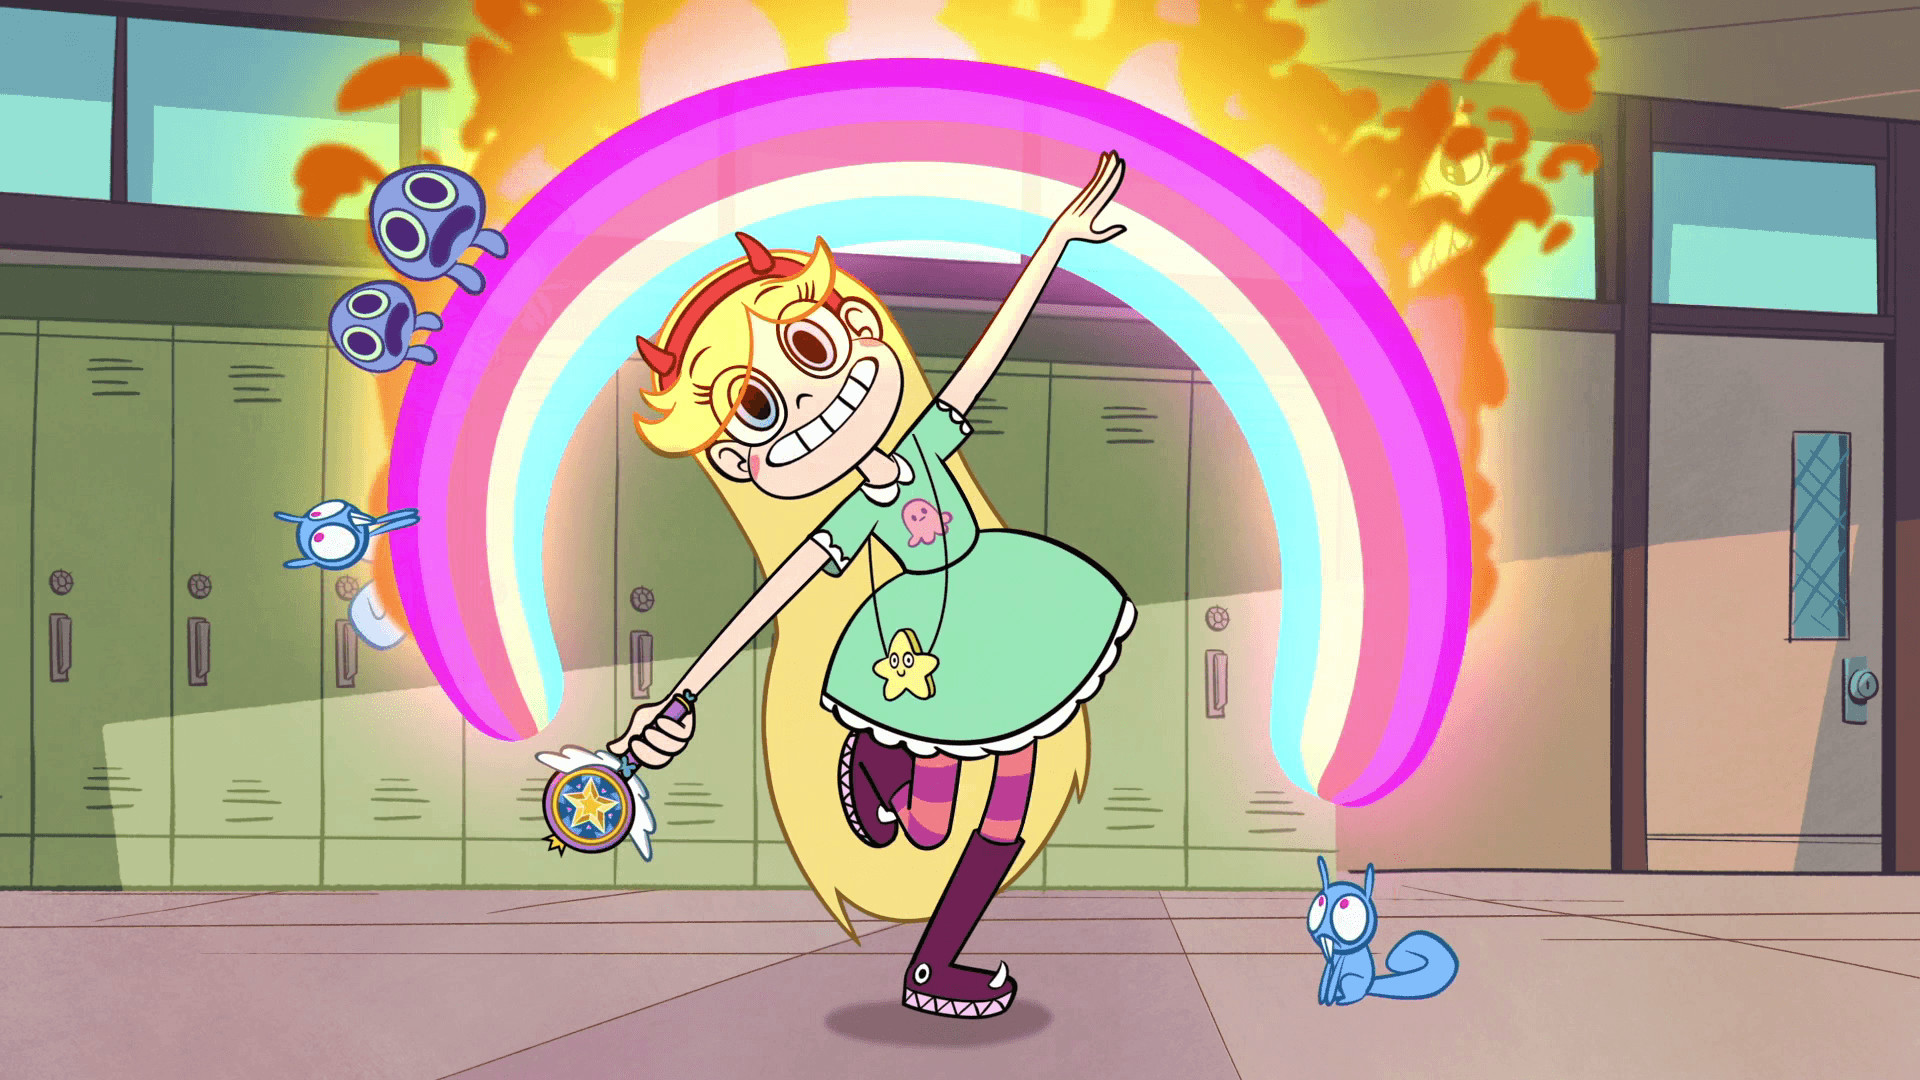 star vs the forces of evil wallpaper hd,cartoon,games,illustration,fictional character,plant